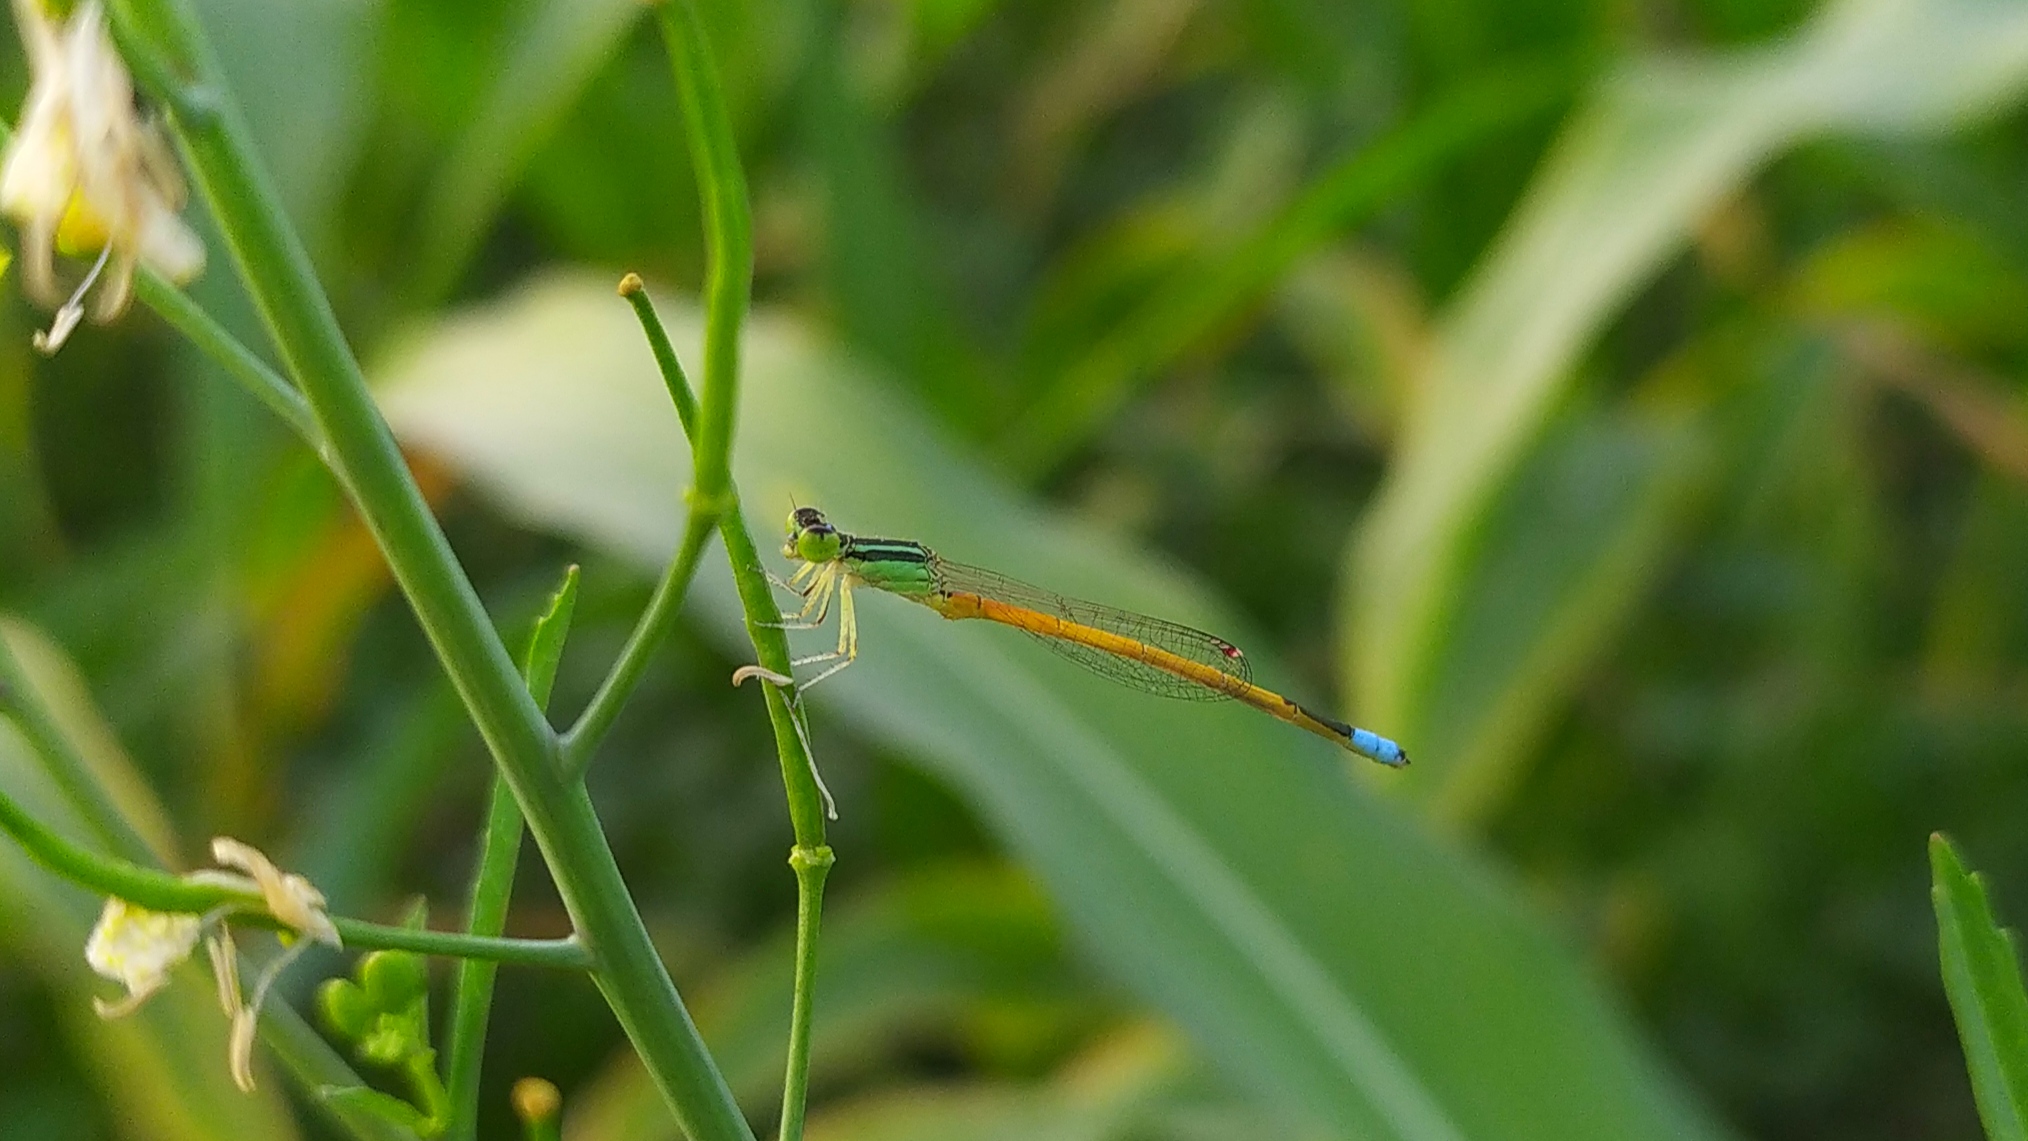 A small dragonfly on stem